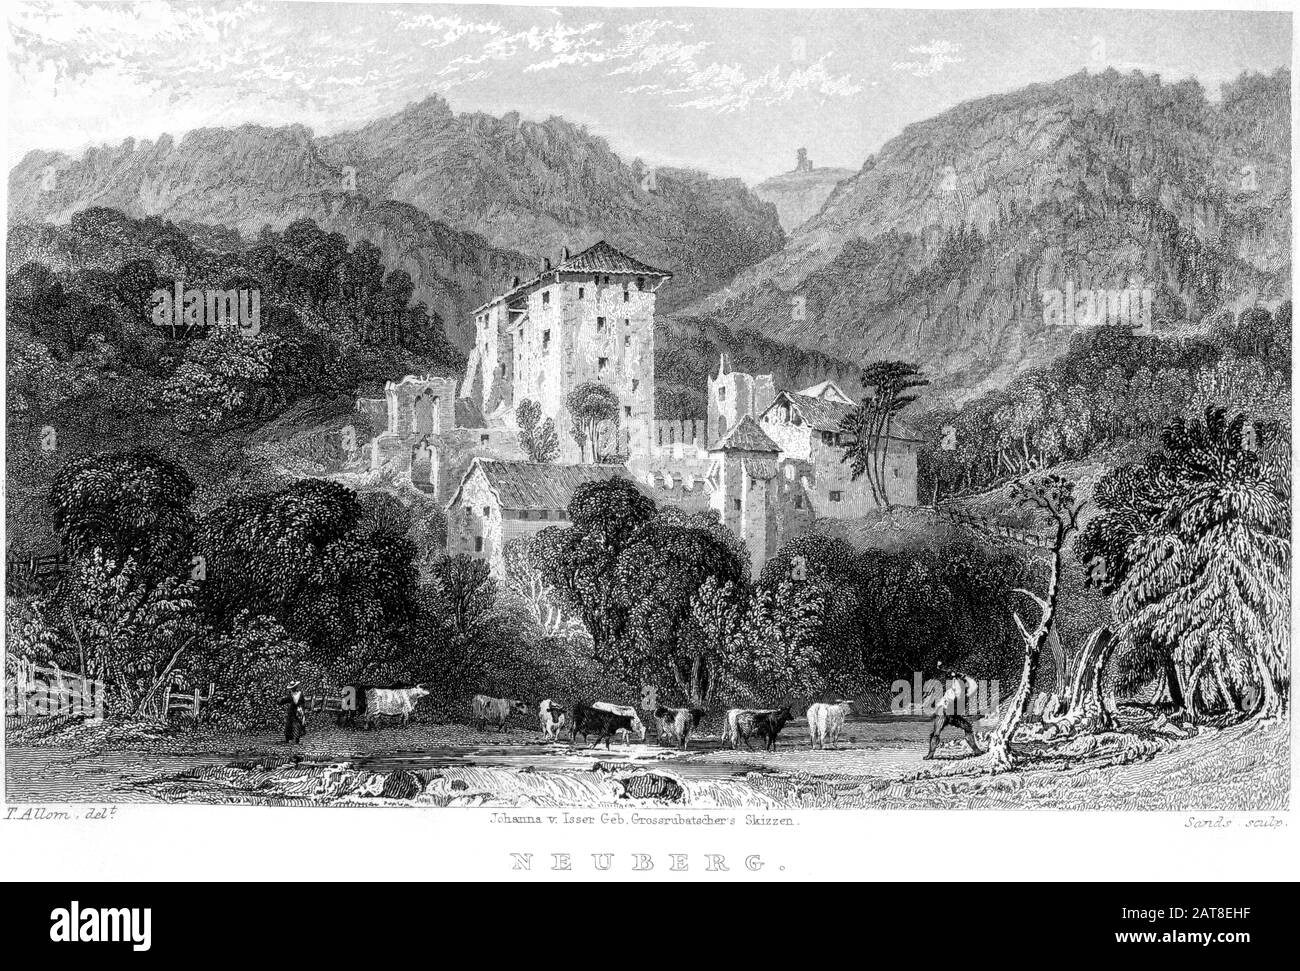 An engraving of Neuberg (Trauttmansdorff Castle) scanned at high resolution from a book printed in 1836. Believed copyright free. Stock Photo